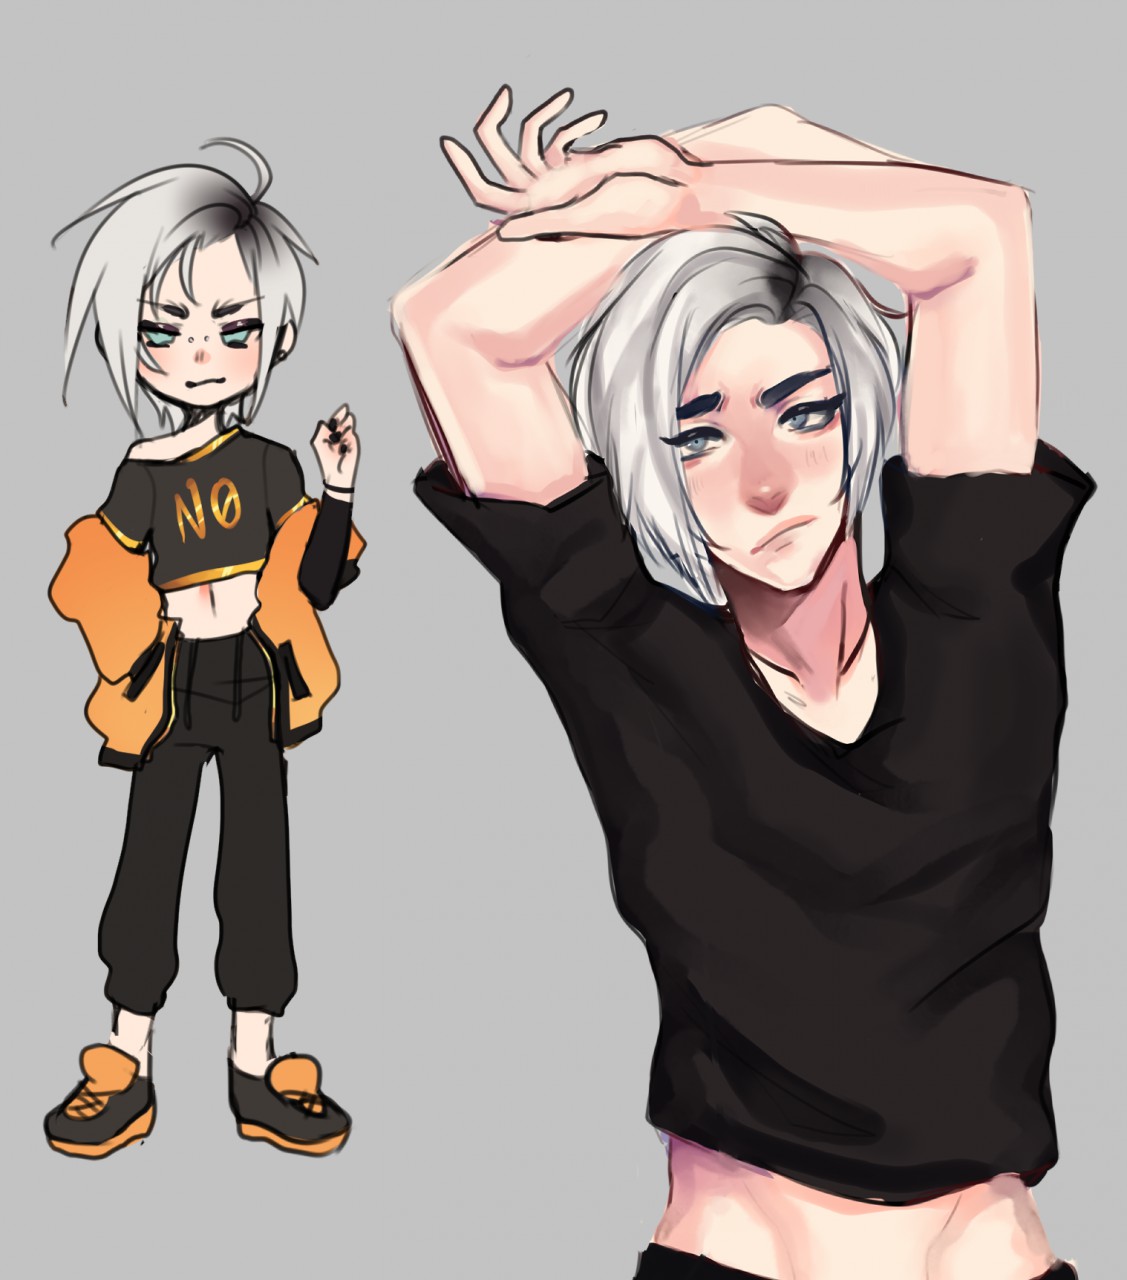 Human oc for sale! 